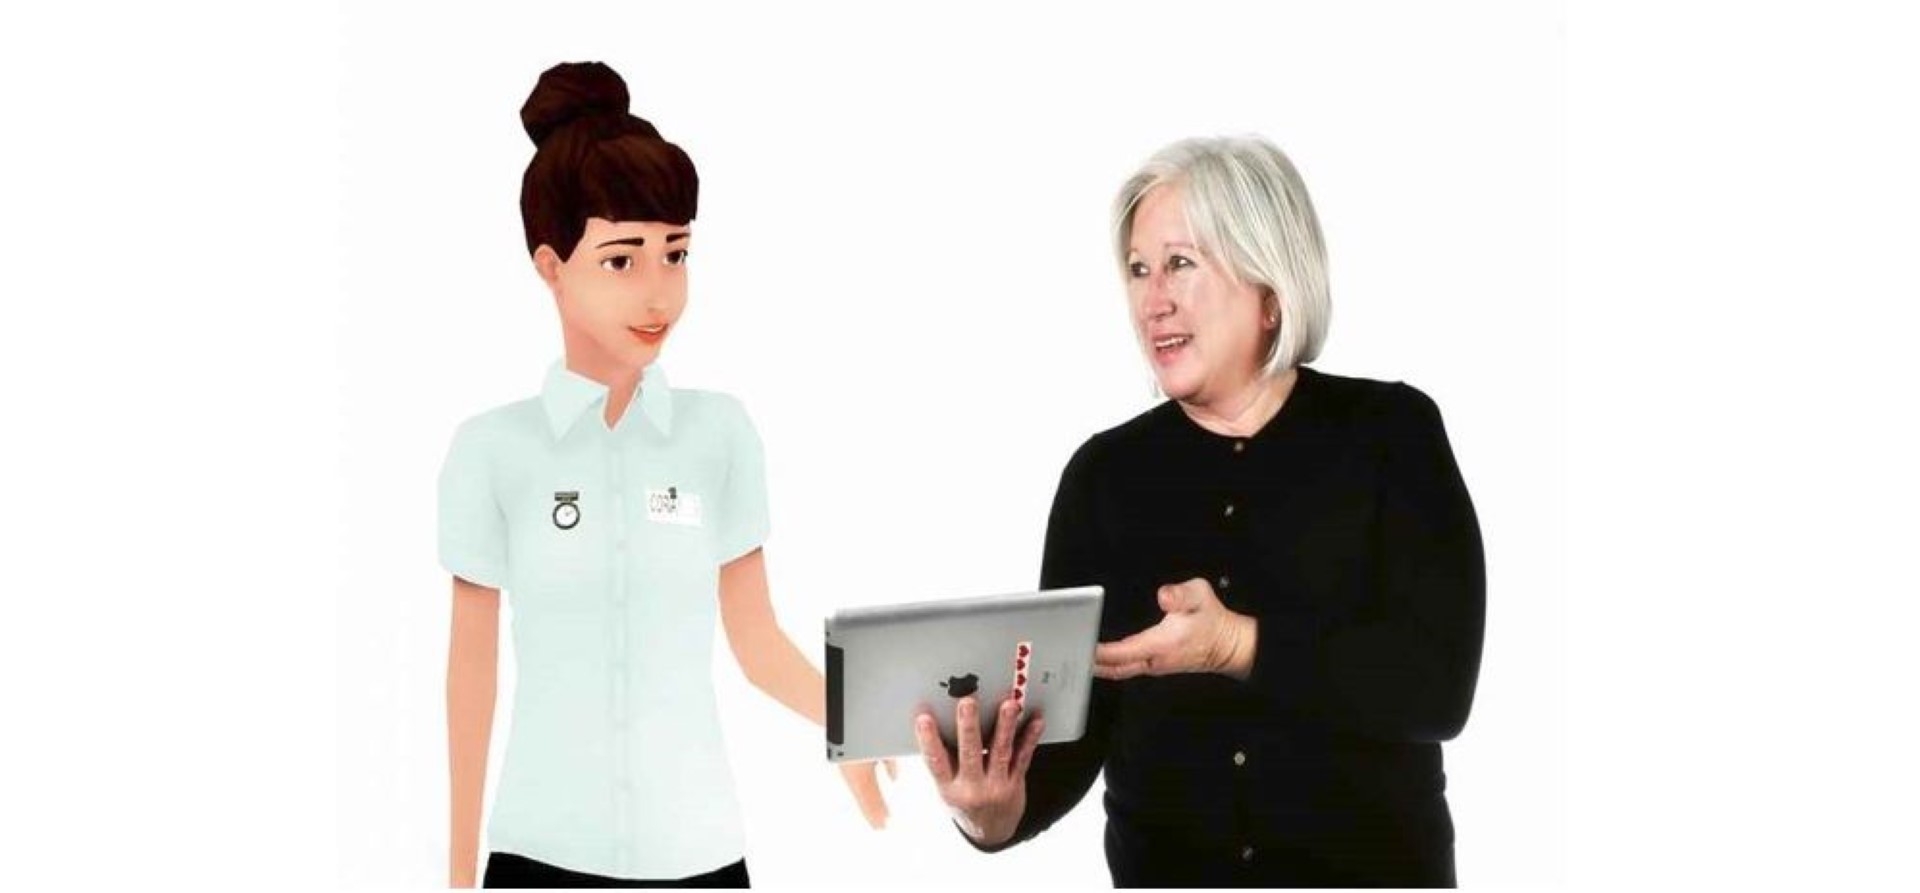 Two women discussing looking at the Ipad